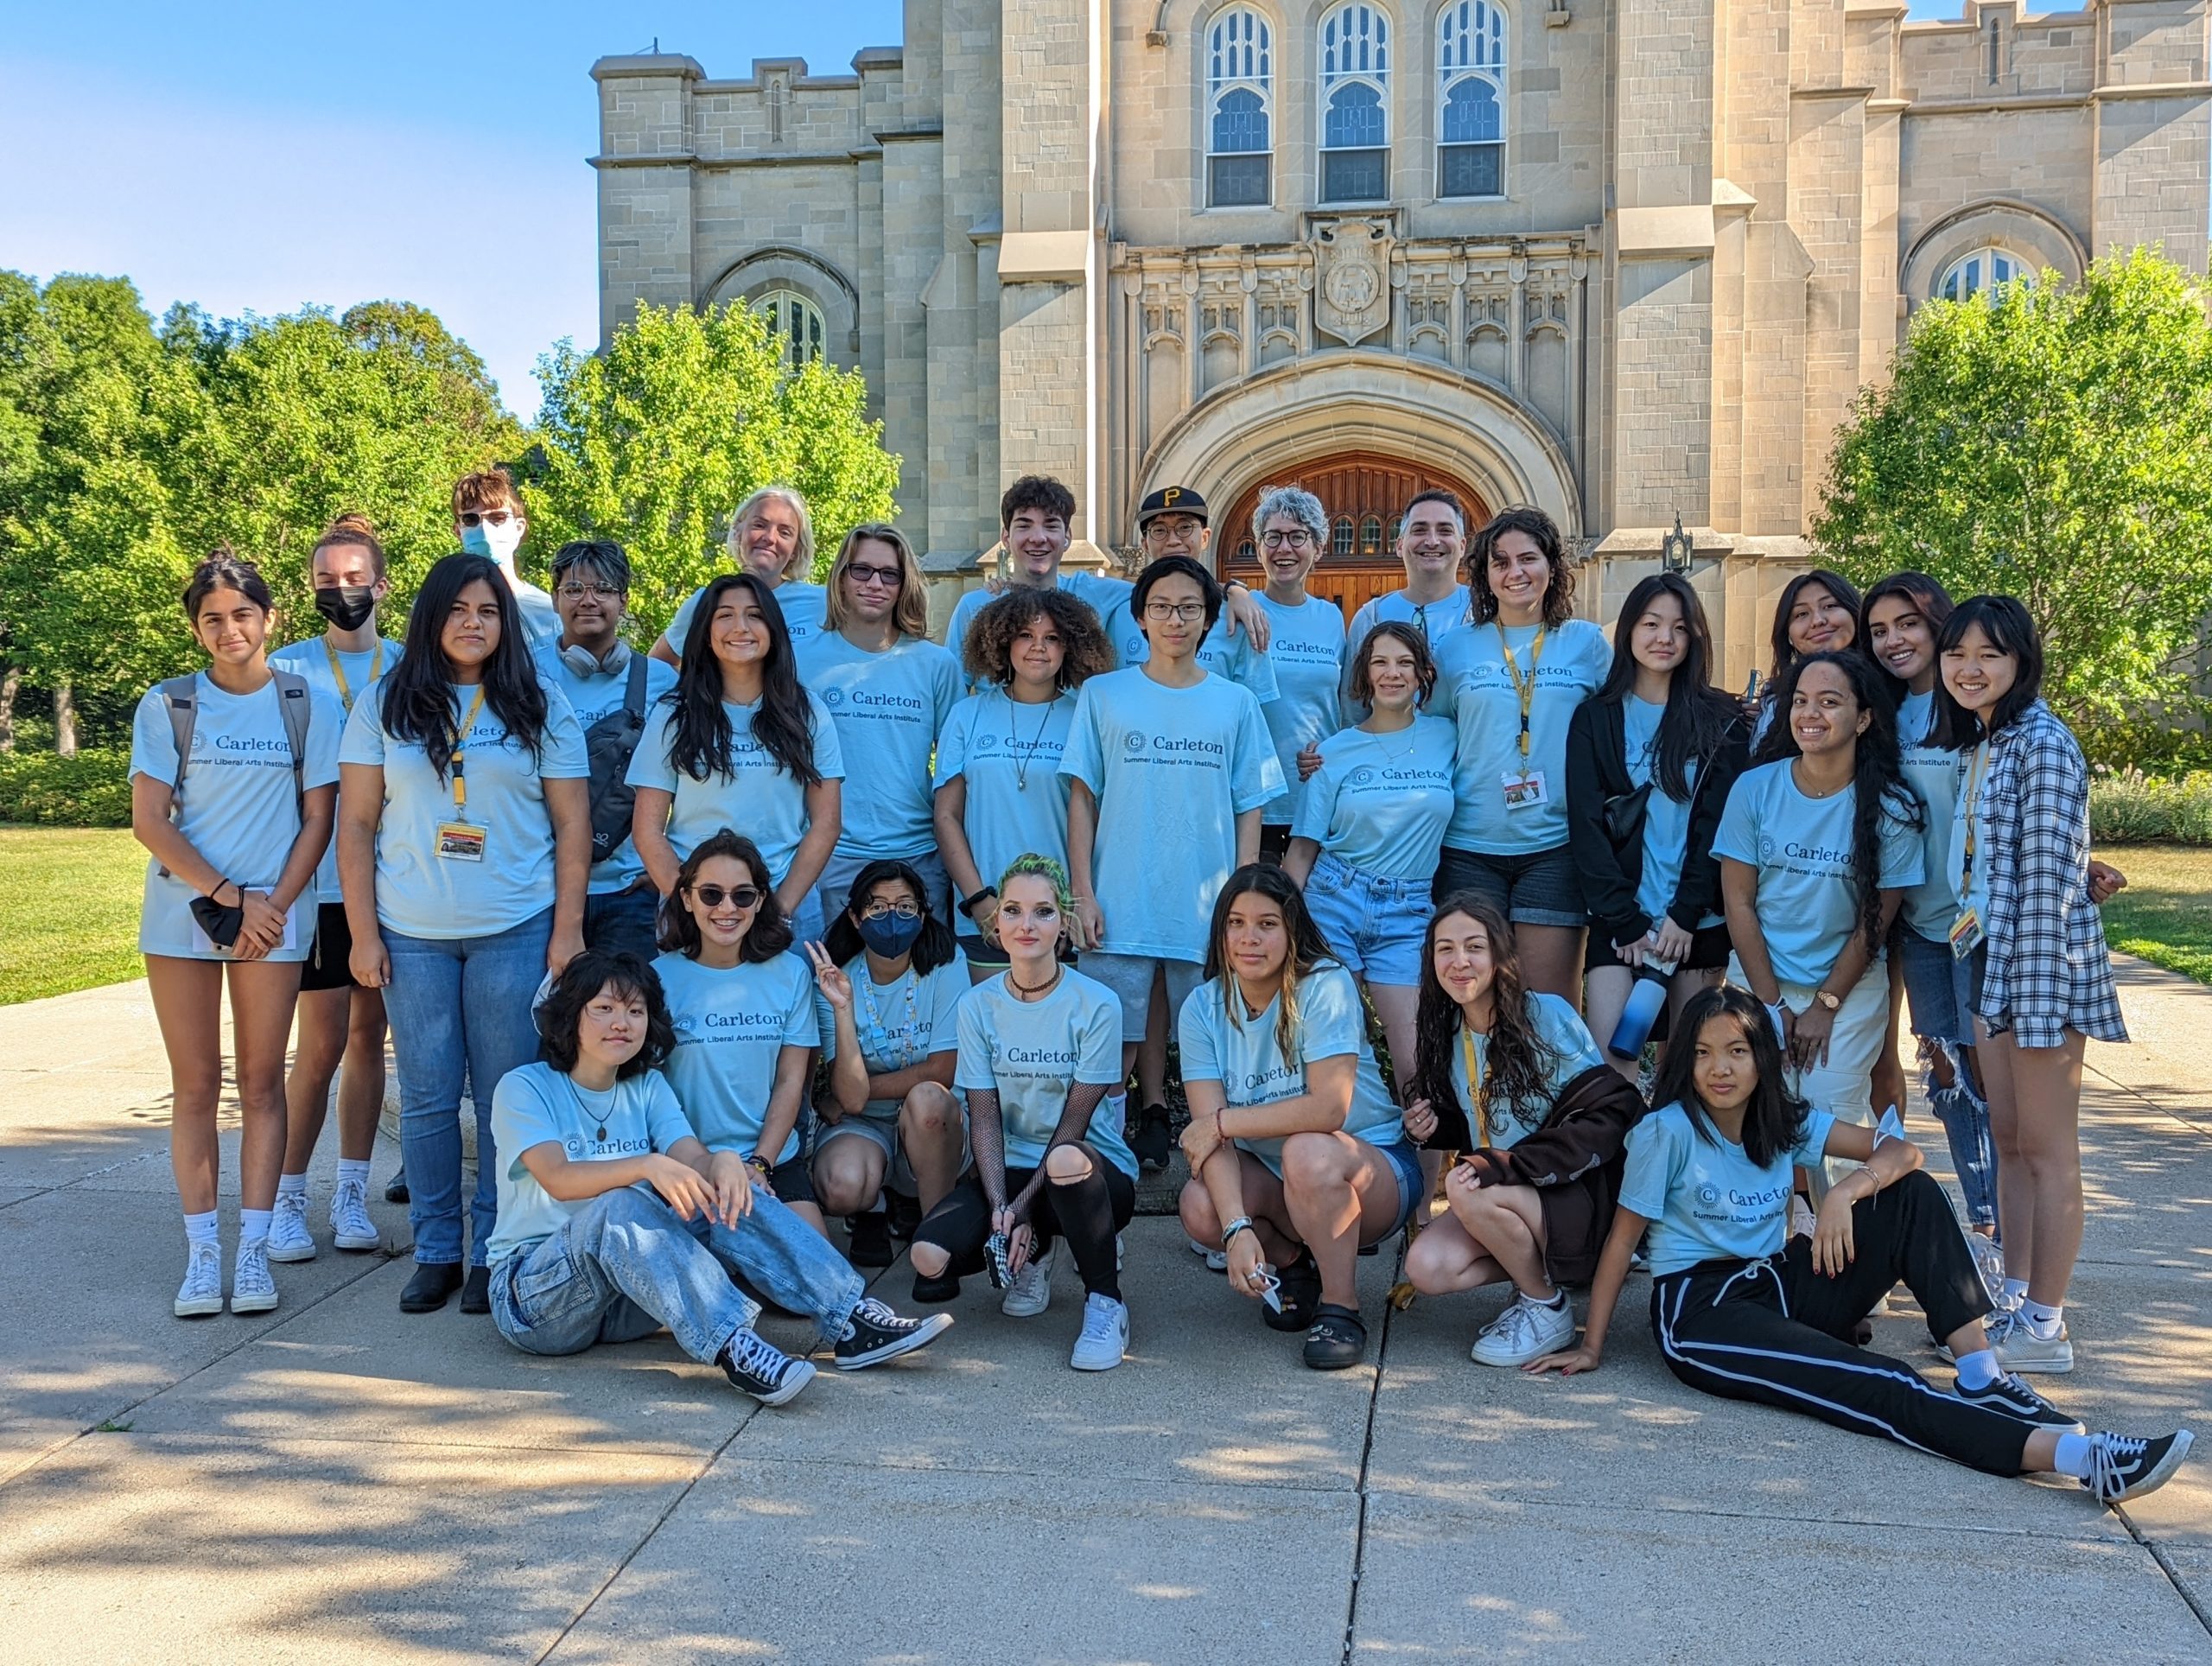 A group of 24 students and their professors gather and smile in front of Carleton's Chapel. They are all wearing light blue Carleton SLAI t-shirts